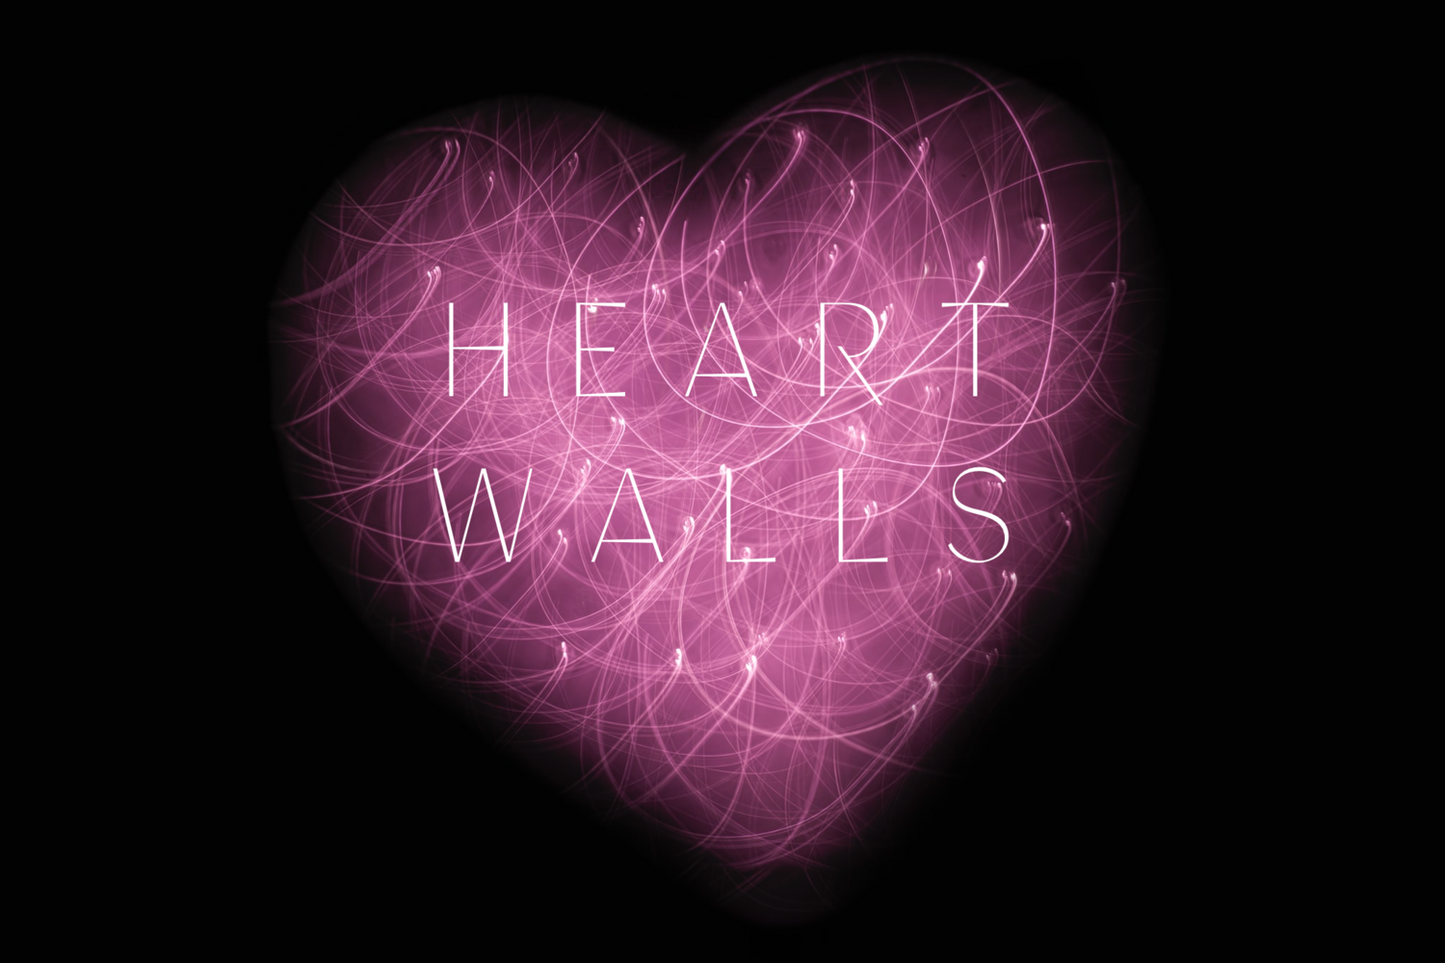 Galactic Heart Wall Etheric Light Surgery - For Clearing Emotional Imprints, Shields & Corded Attachments